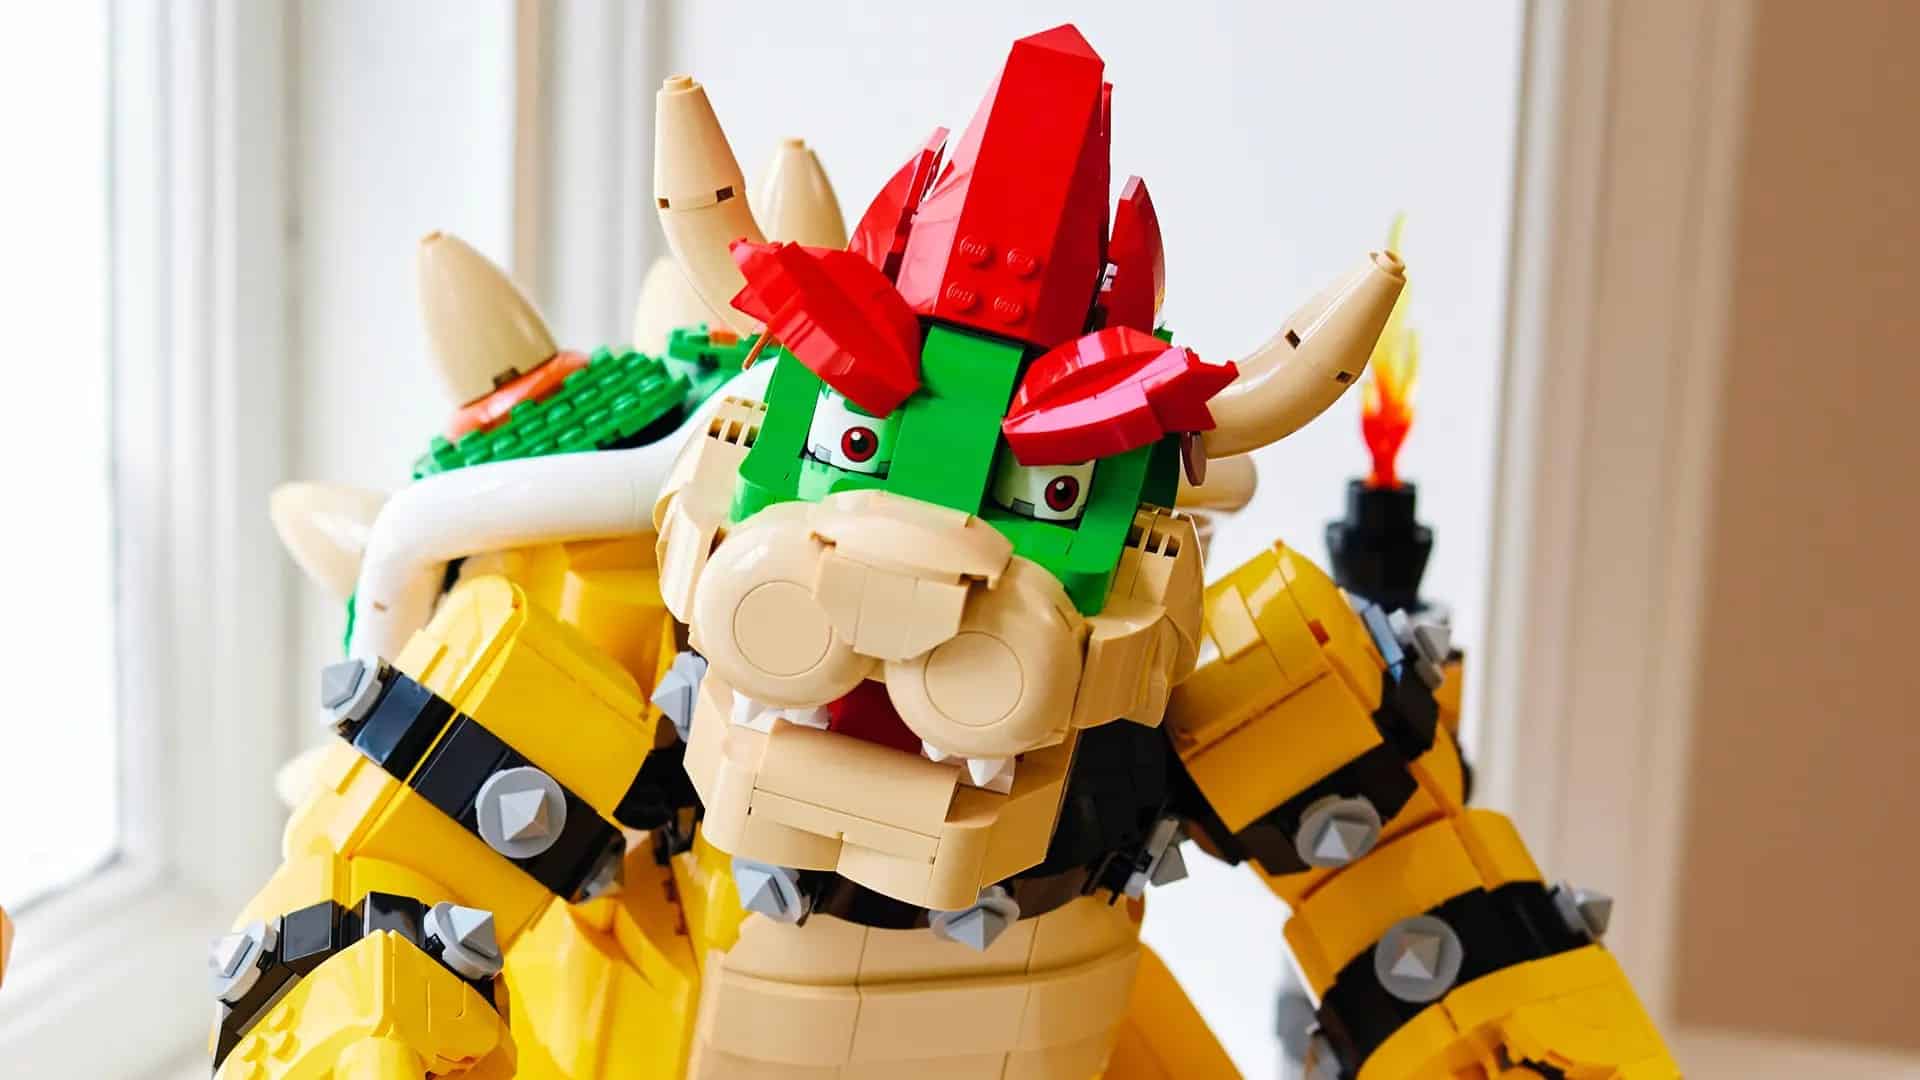 Check Out How LEGO Built Their Giant LEGO Bowser From Comic-Con